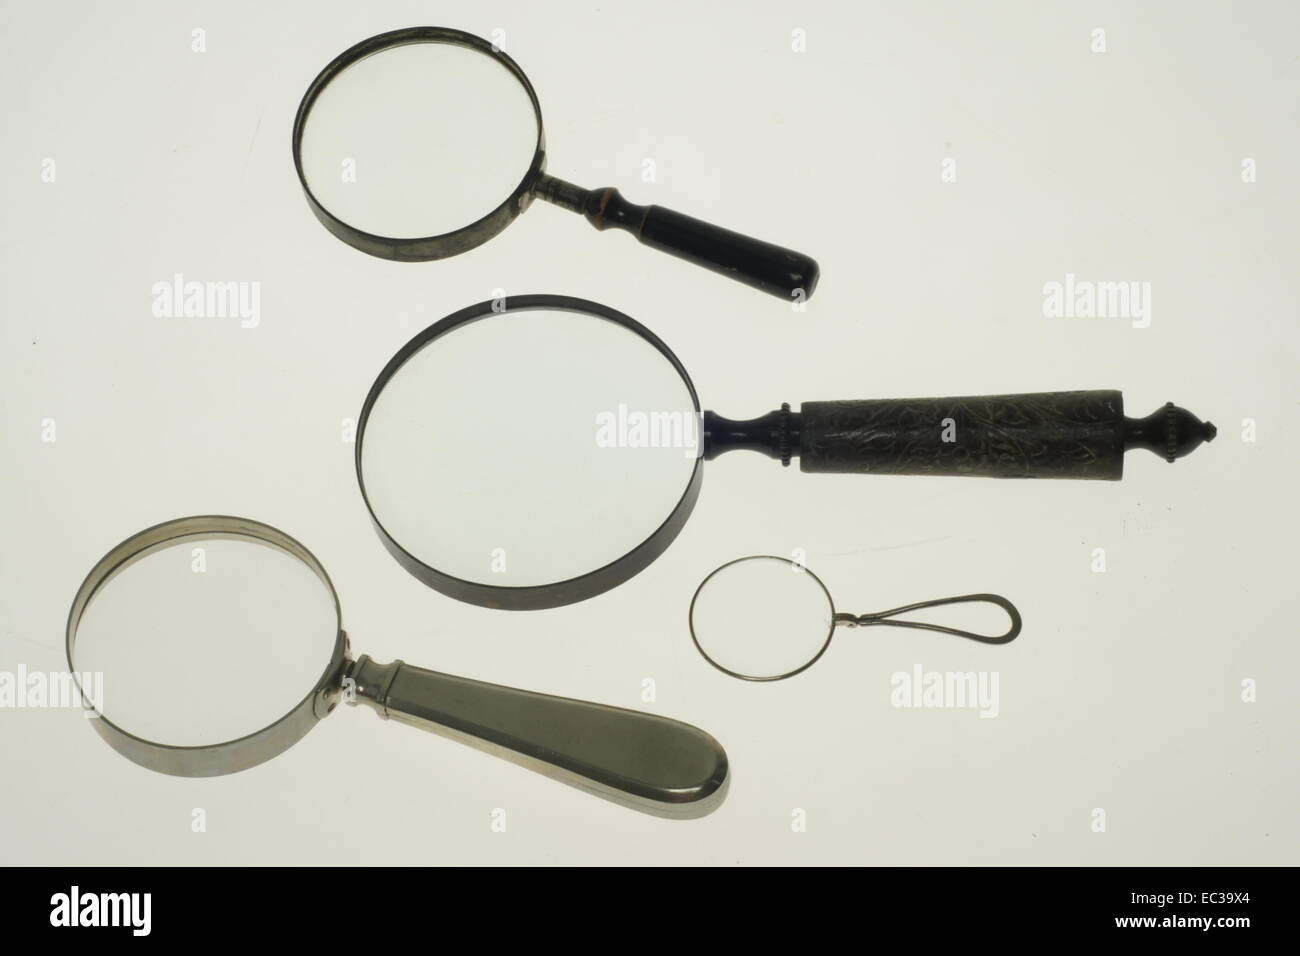 magnifying glasses in different sizes Stock Photo